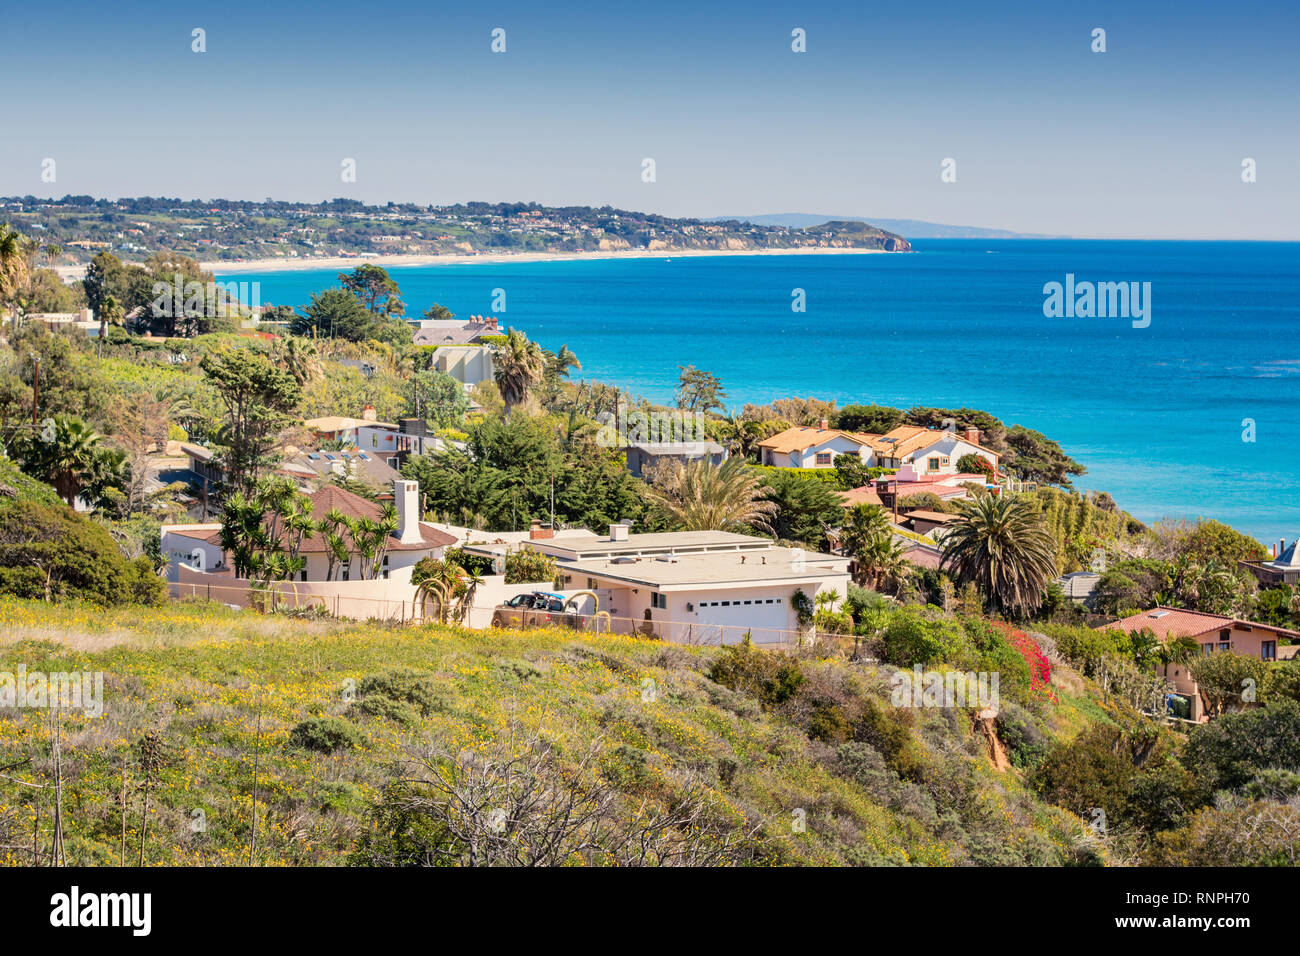 Houses in Malibu, California, USA with the Pacific Ocean in the background. Stock Photo